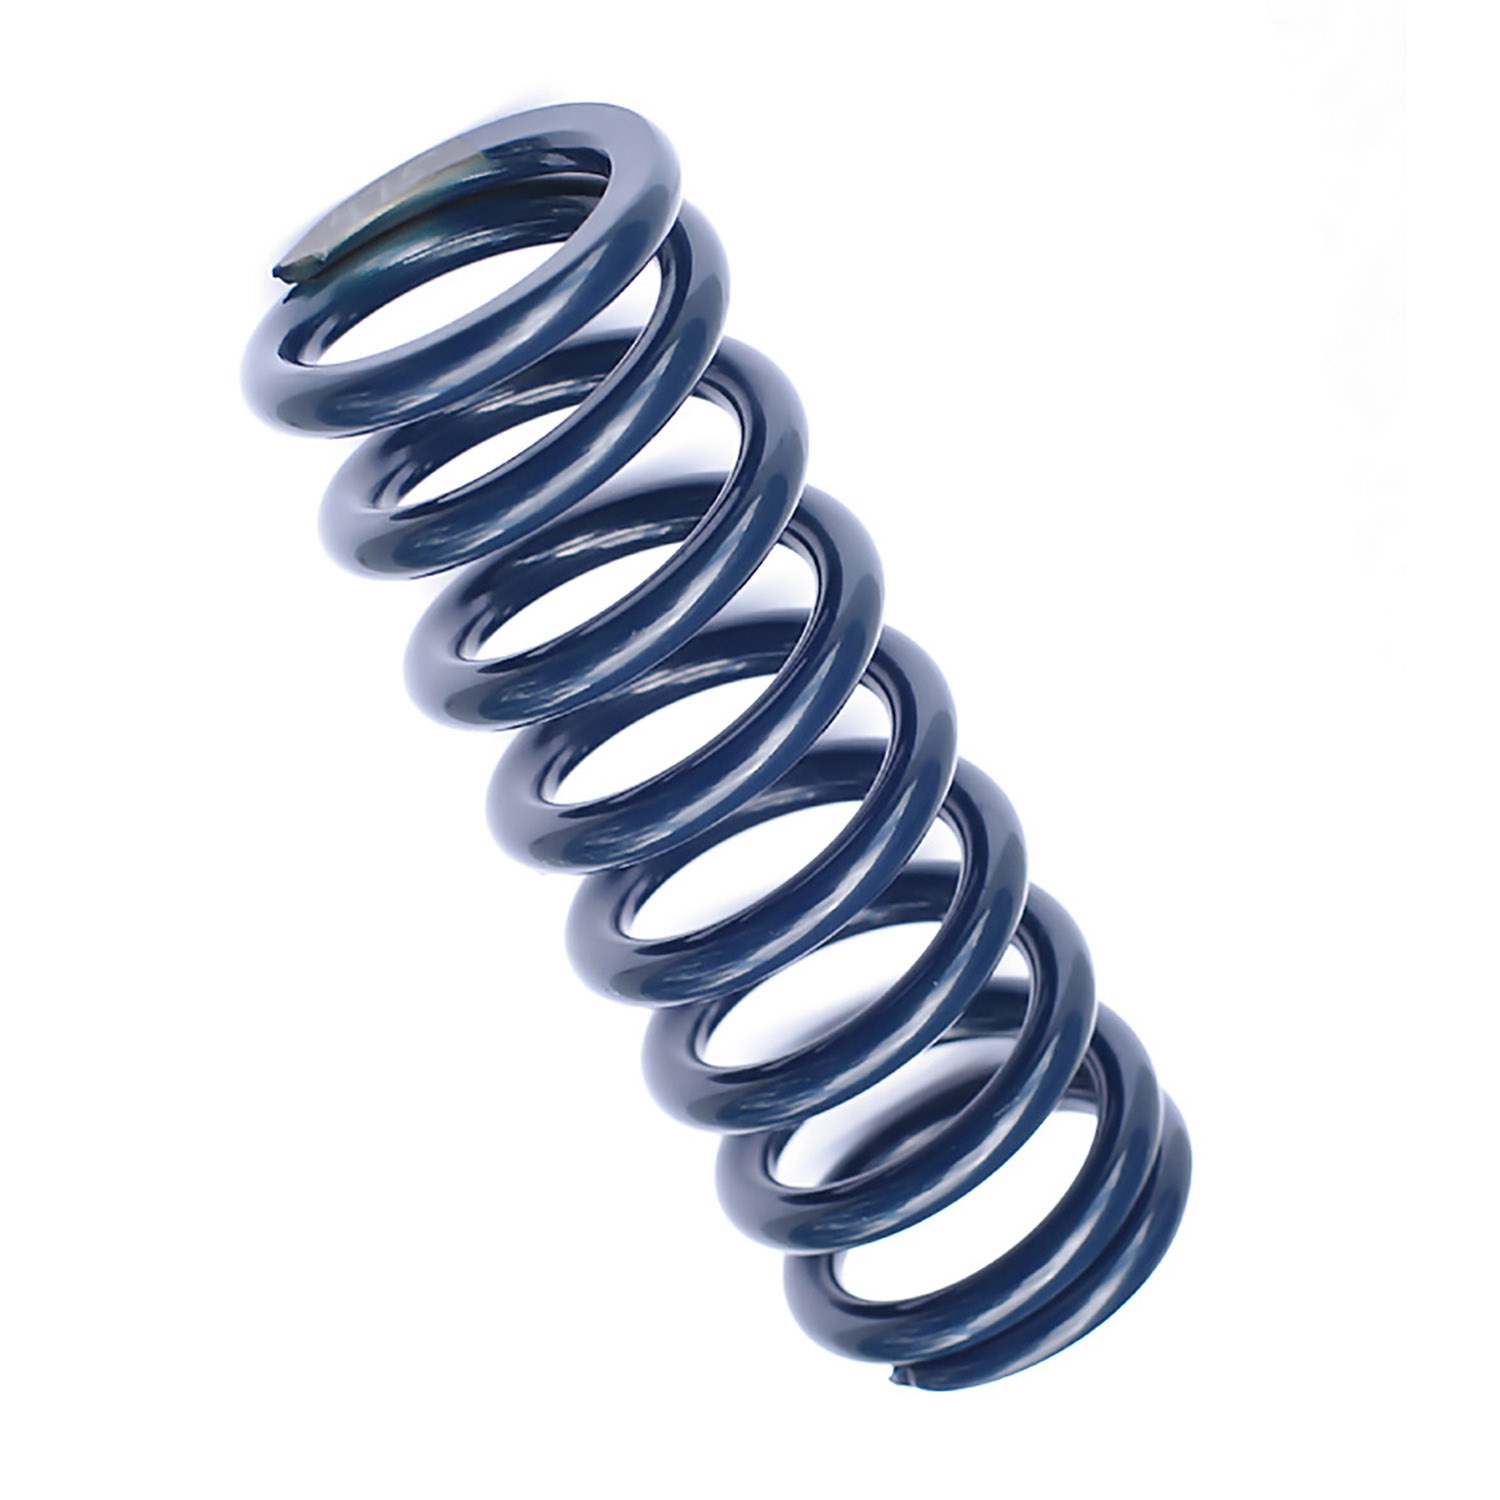 0450lbs Hyperco 187B0450 Coil Over Spring 2.5" I.D. 7" Free Length